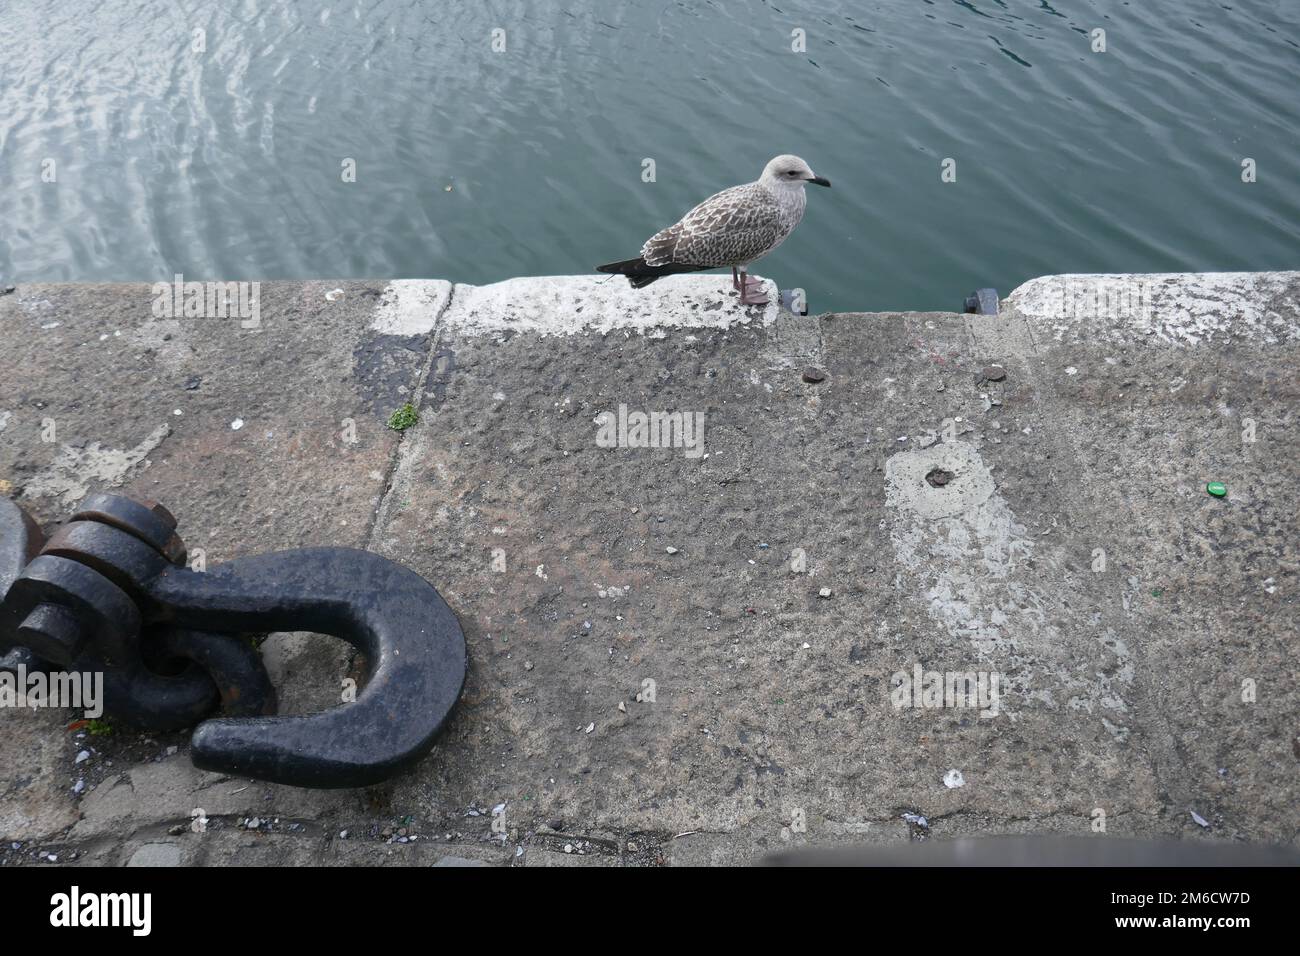 Seagull standing on concrete surface with metal ship mooring hook by ocean Stock Photo